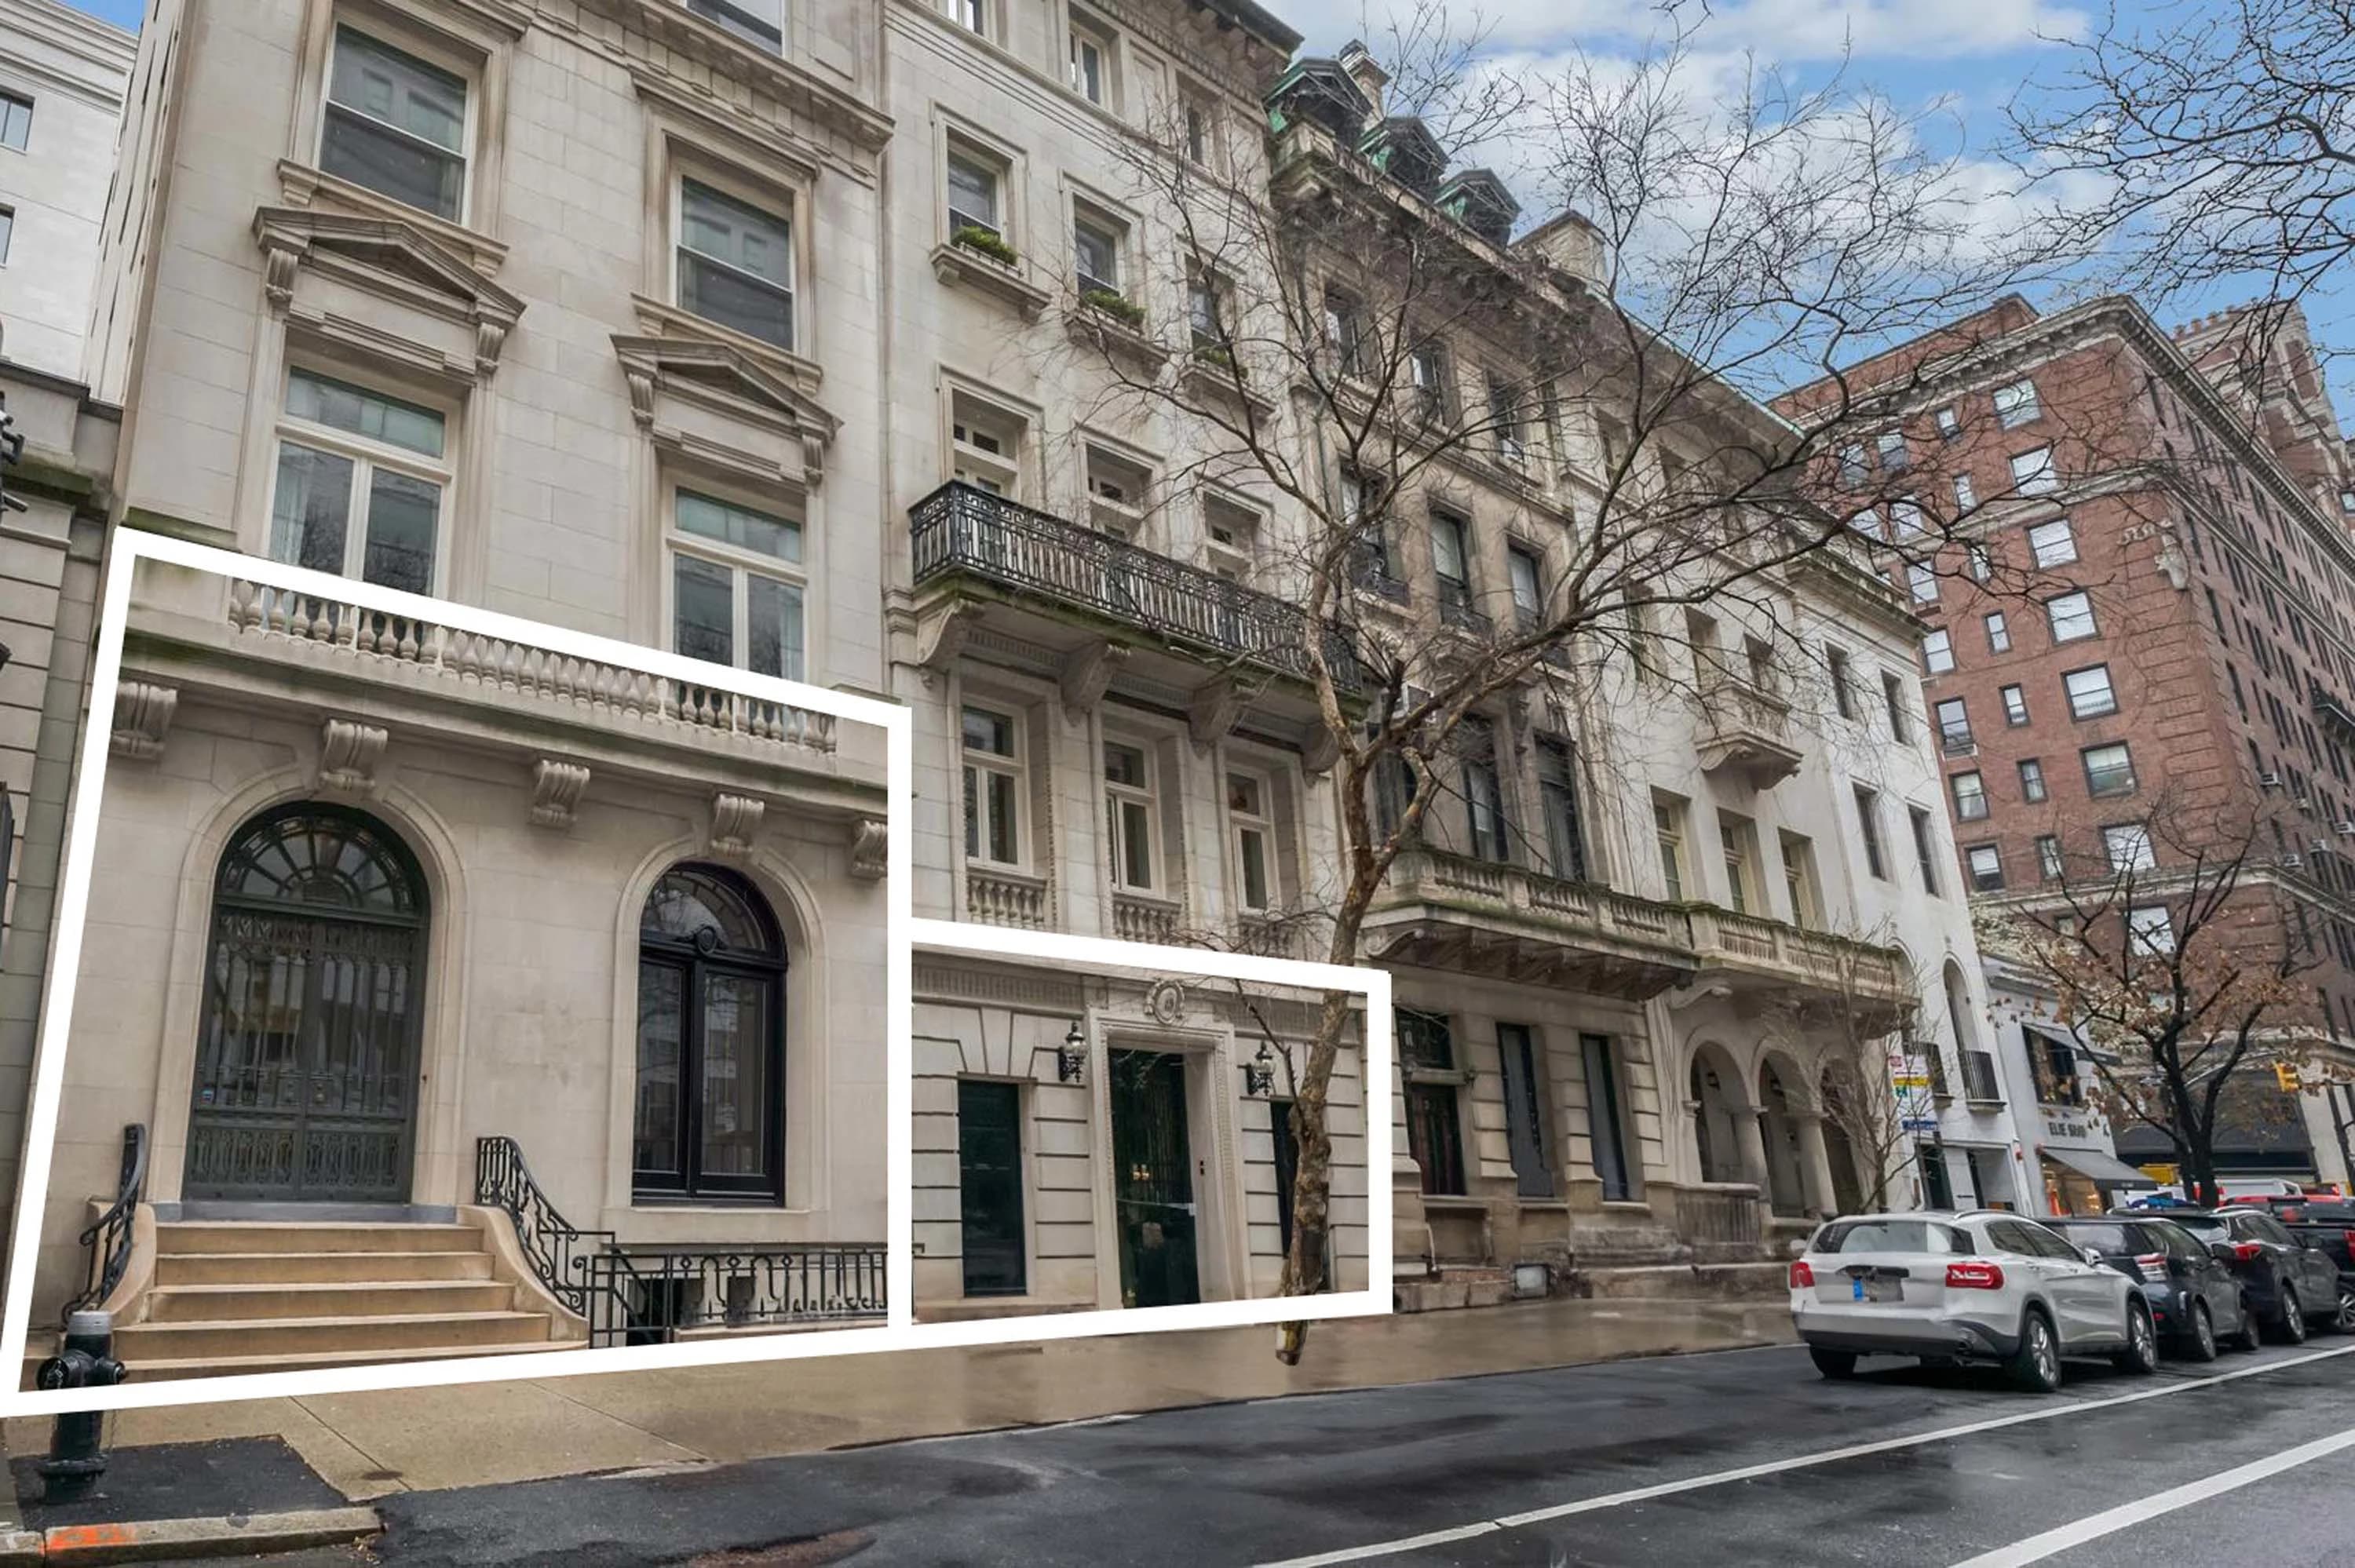 Upper East Side New York Turnkey Gallery and Residence Adjacent to the Renowned Frick Museum to Auction